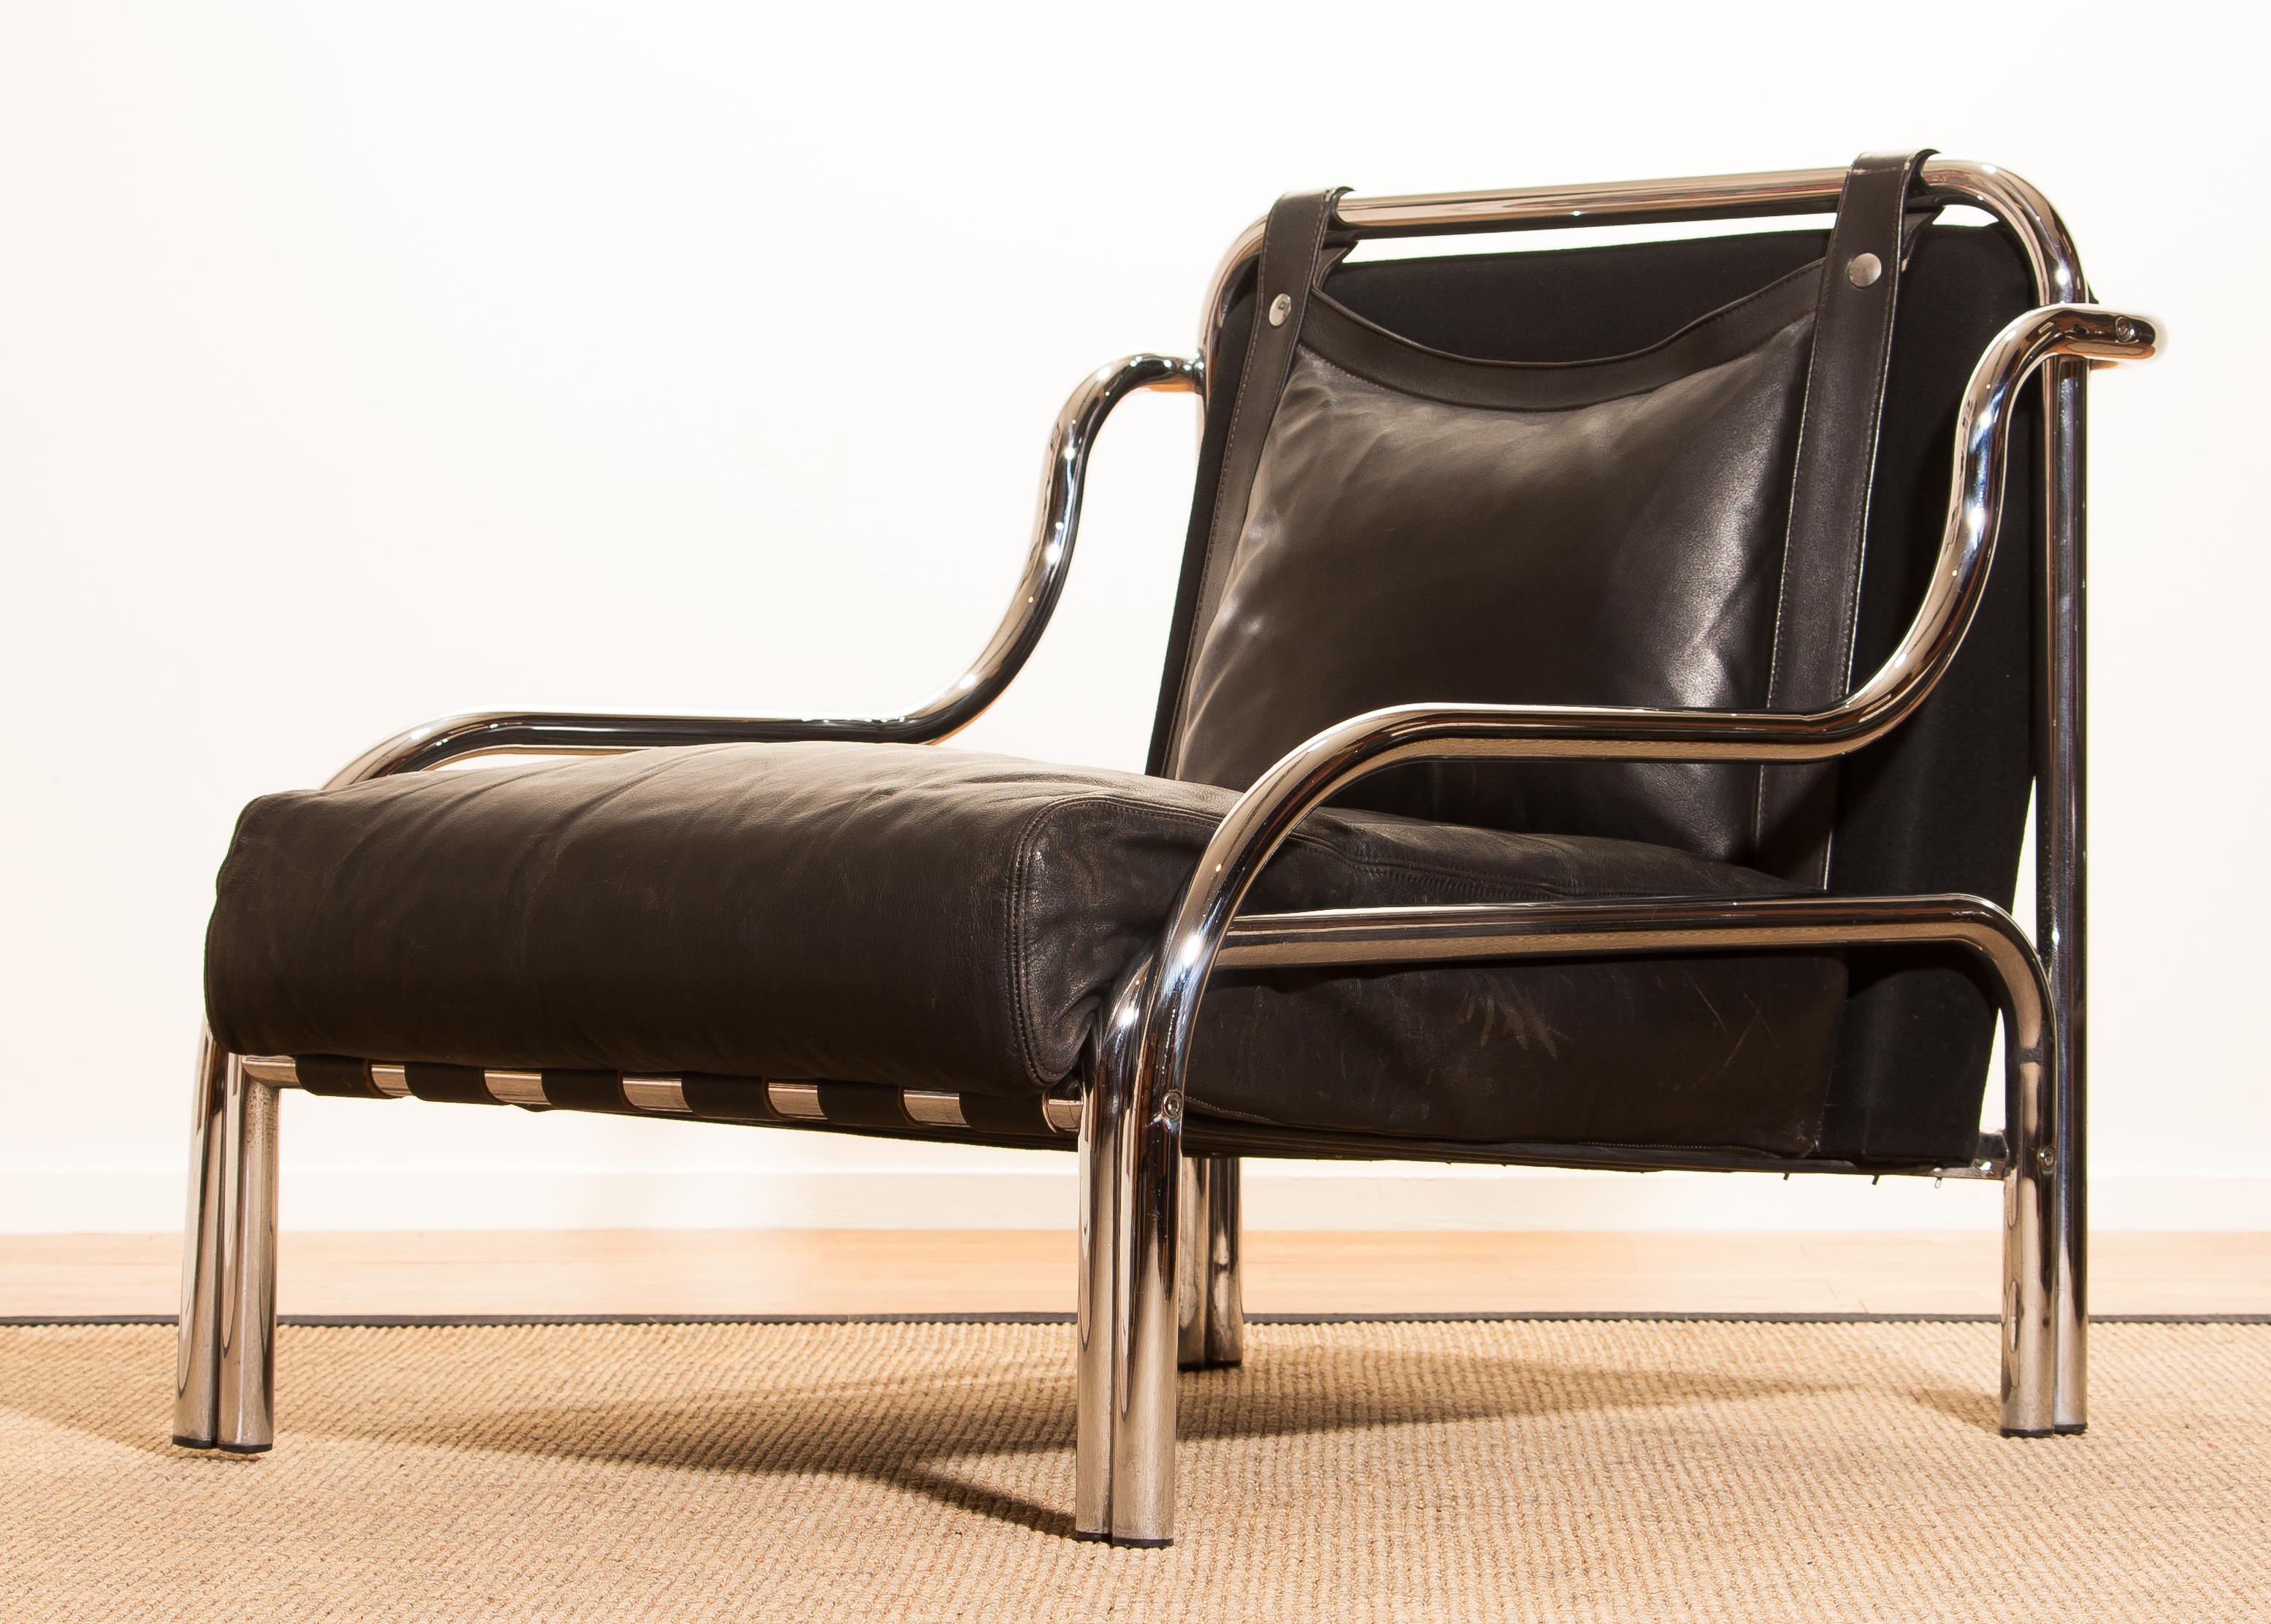 Italian 1960s Leather and Chrome Lounge Chair by Gae Aulenti for Poltronova